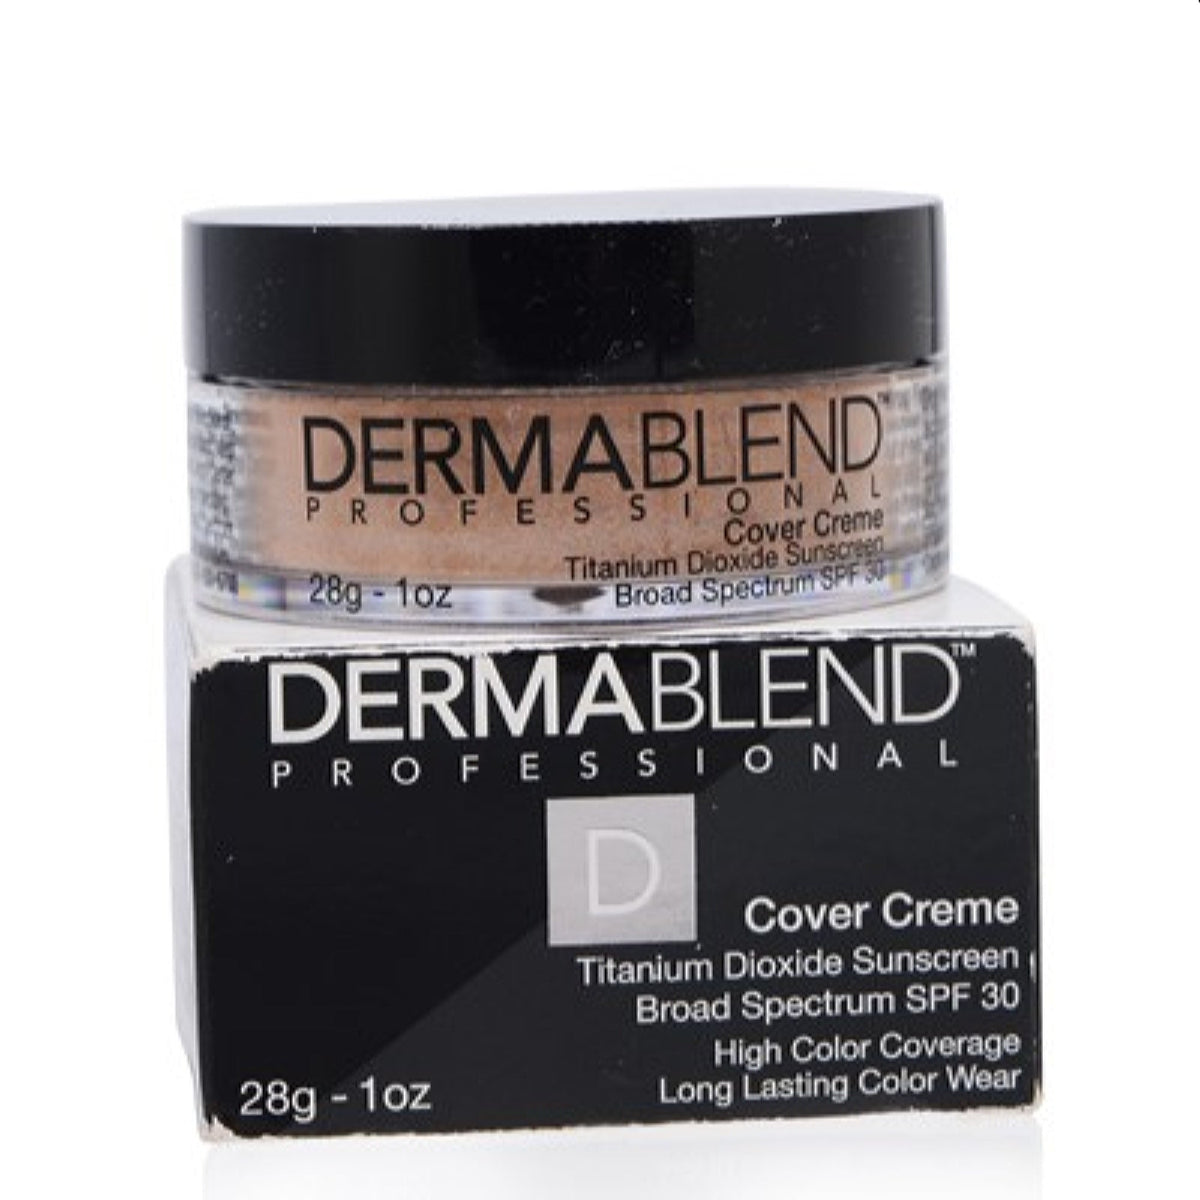 Dermablend Cover Creme Foundation Spf 30 (30W Yellow Beige) 1.0 Oz (28 Ml)   